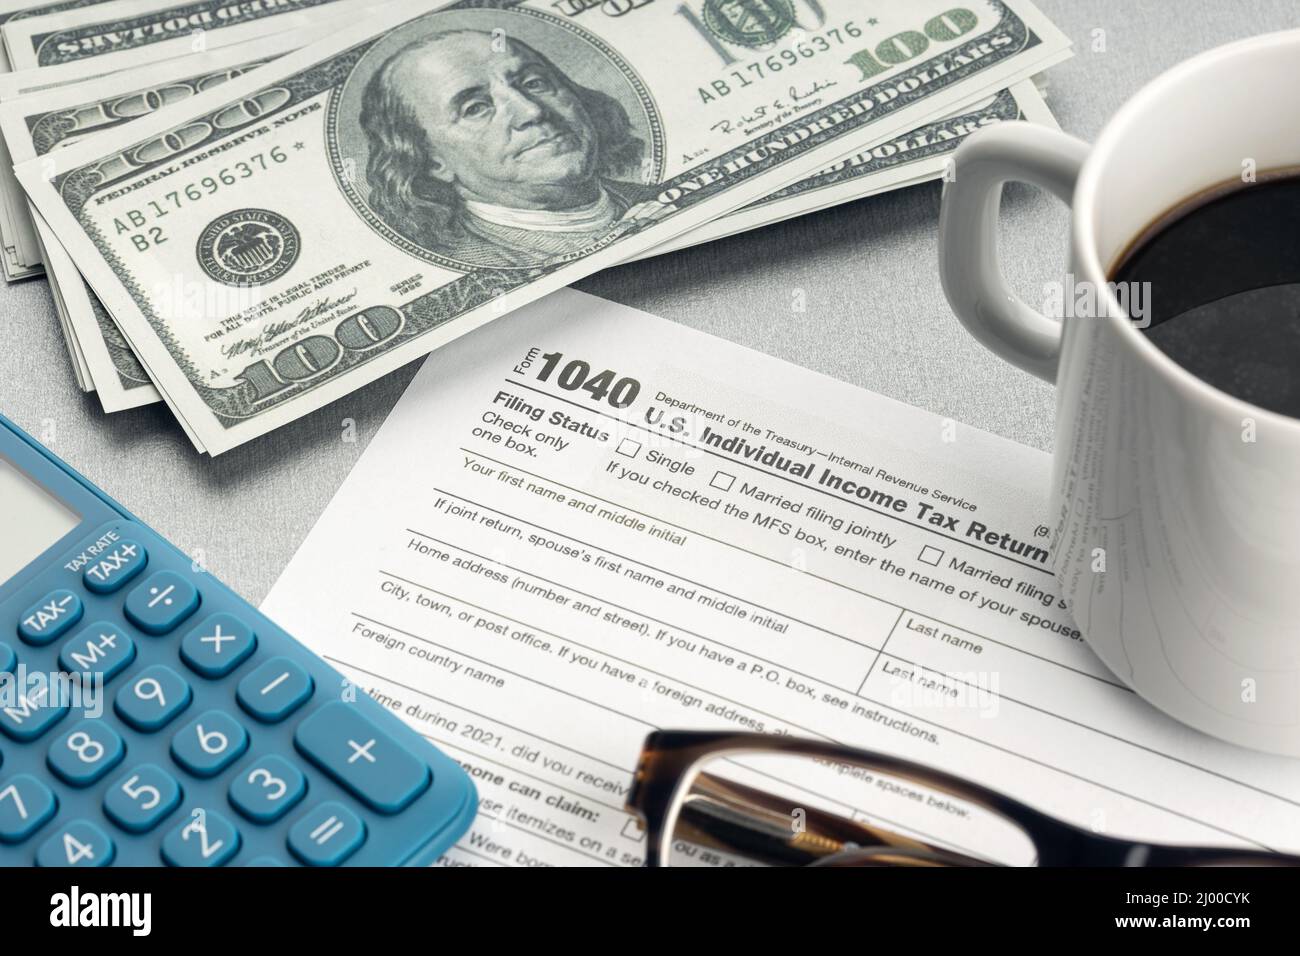 Tax form, calculator, eyeglasses and money on desk. Tax time concept Stock Photo